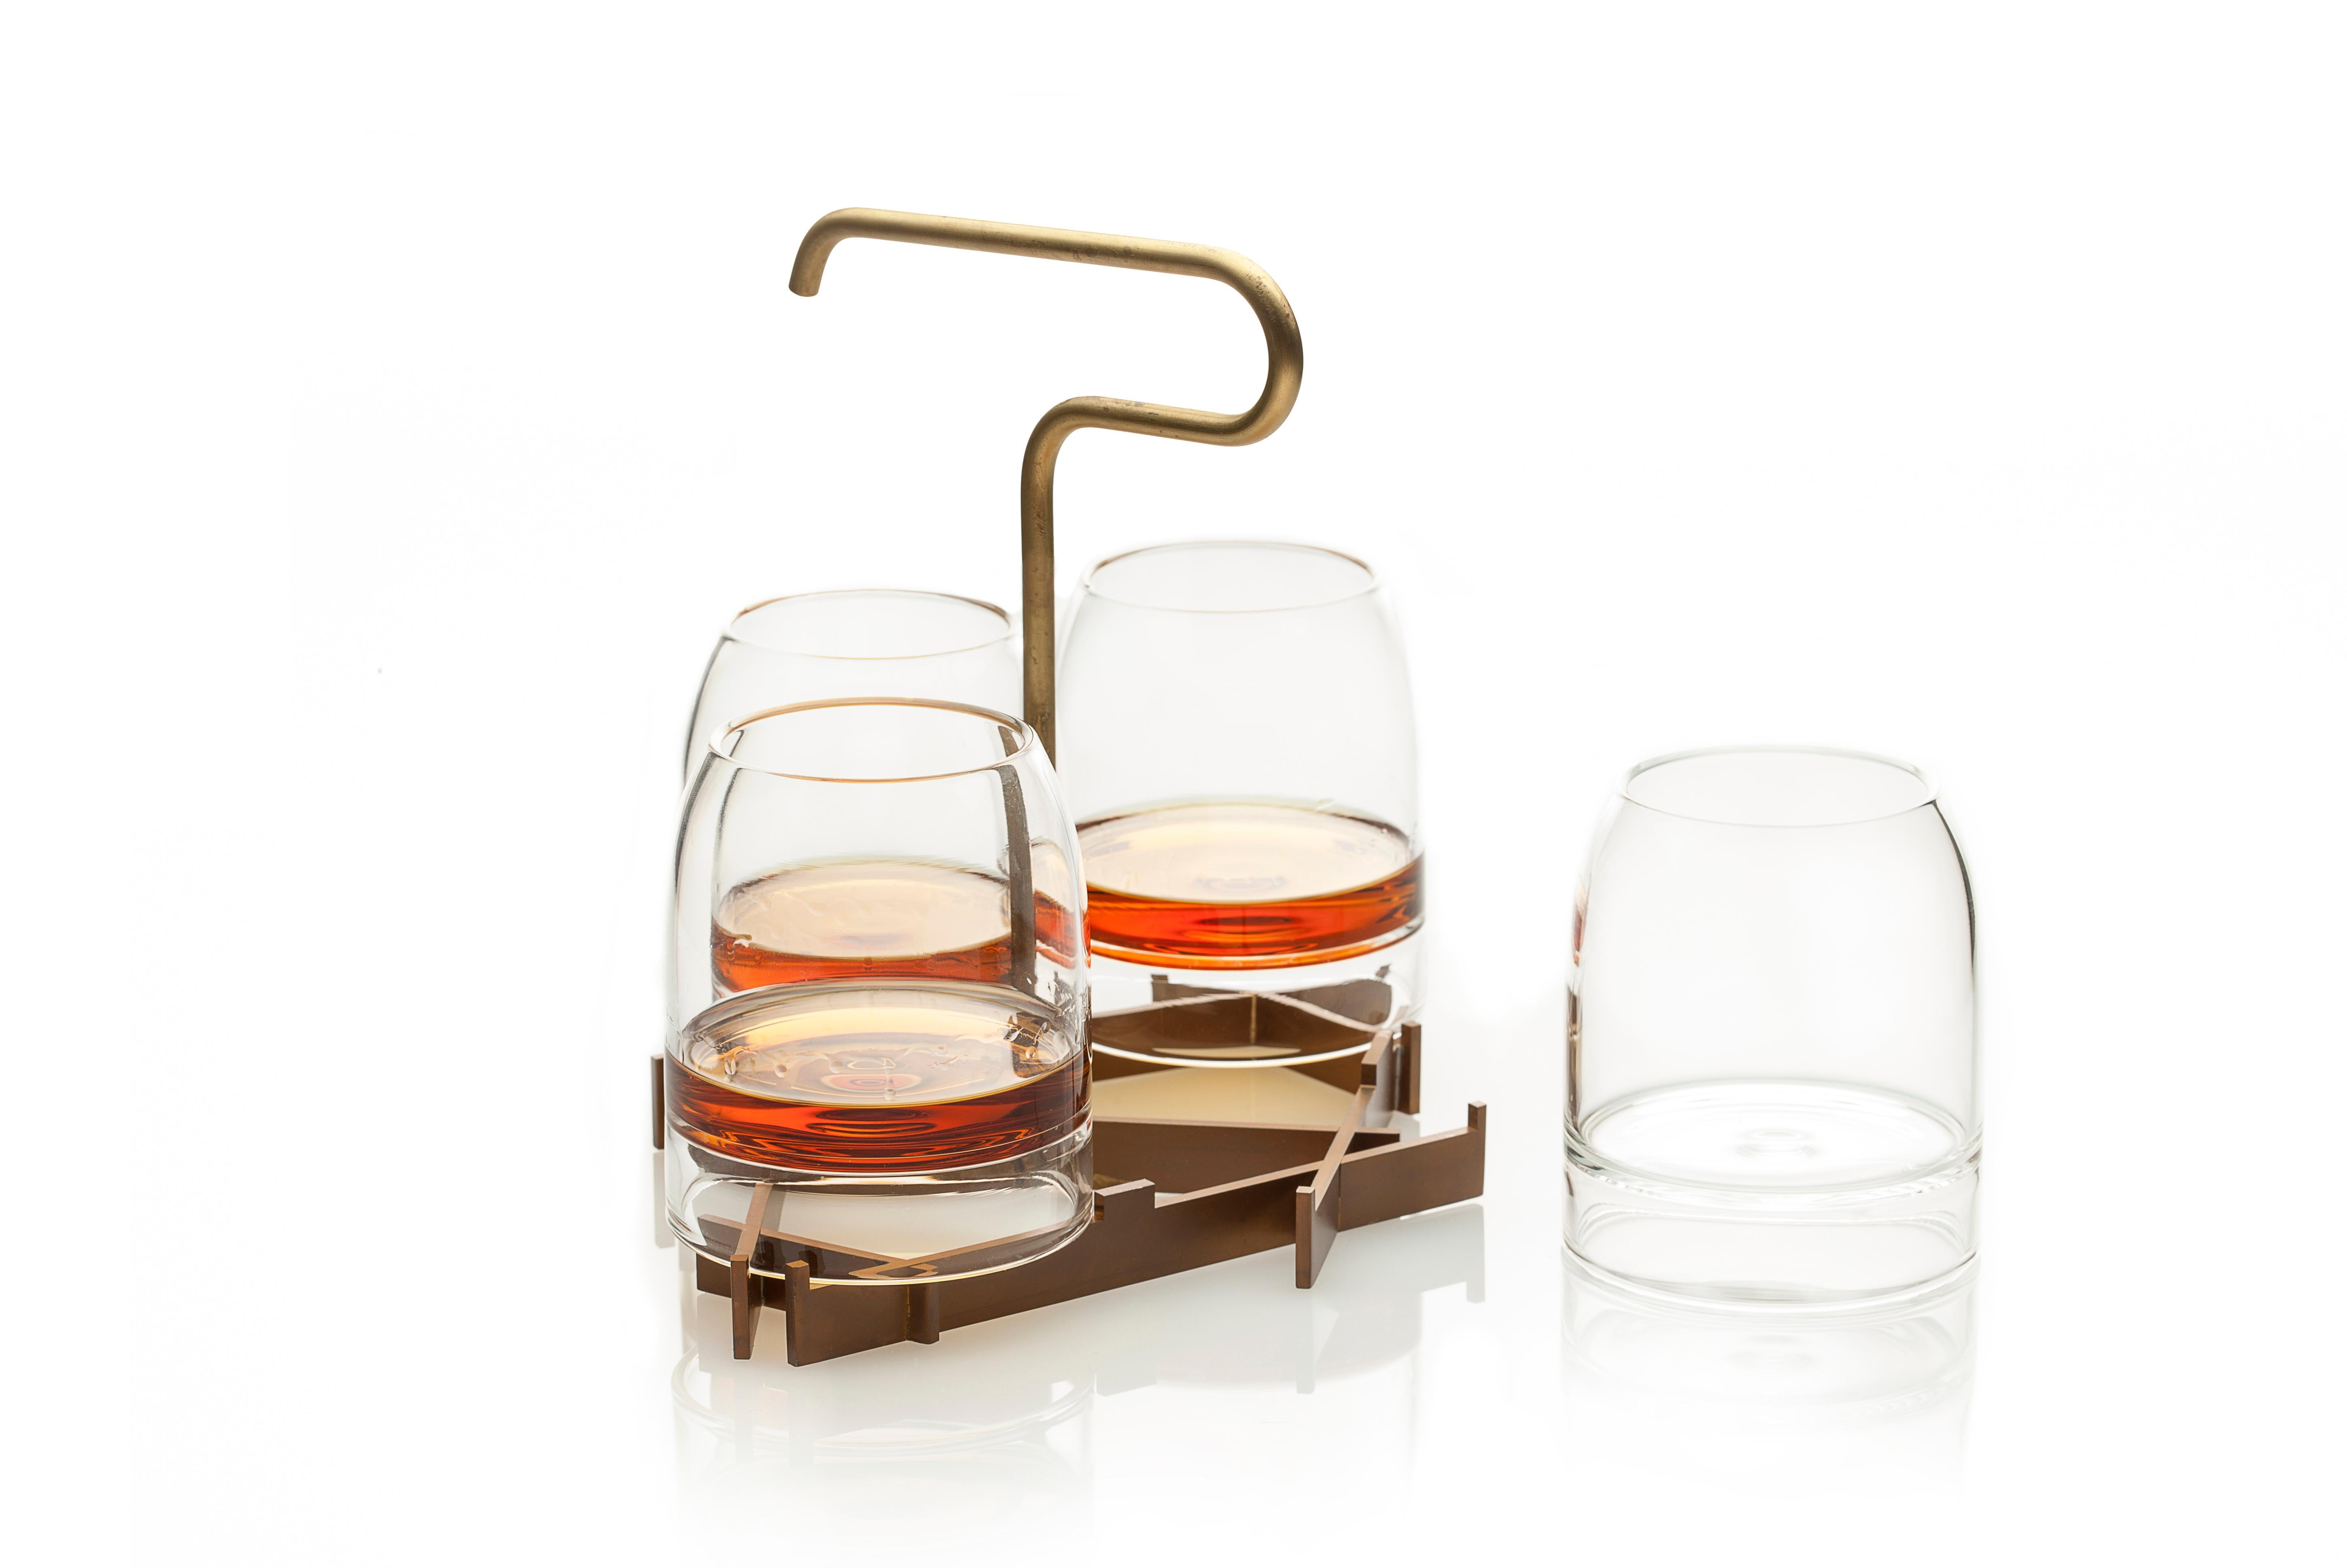 Rare presenter tray by Gentner Design
Dimensions: D 20 x W 20 x H 20 cm
Materials: tarnished brass

1 x Rare presenter tray
4 x Rare whiskey glasses by Felicia Ferrone

Inspired by the pleasures of fine whisky, The Rare Presenter, by gentner